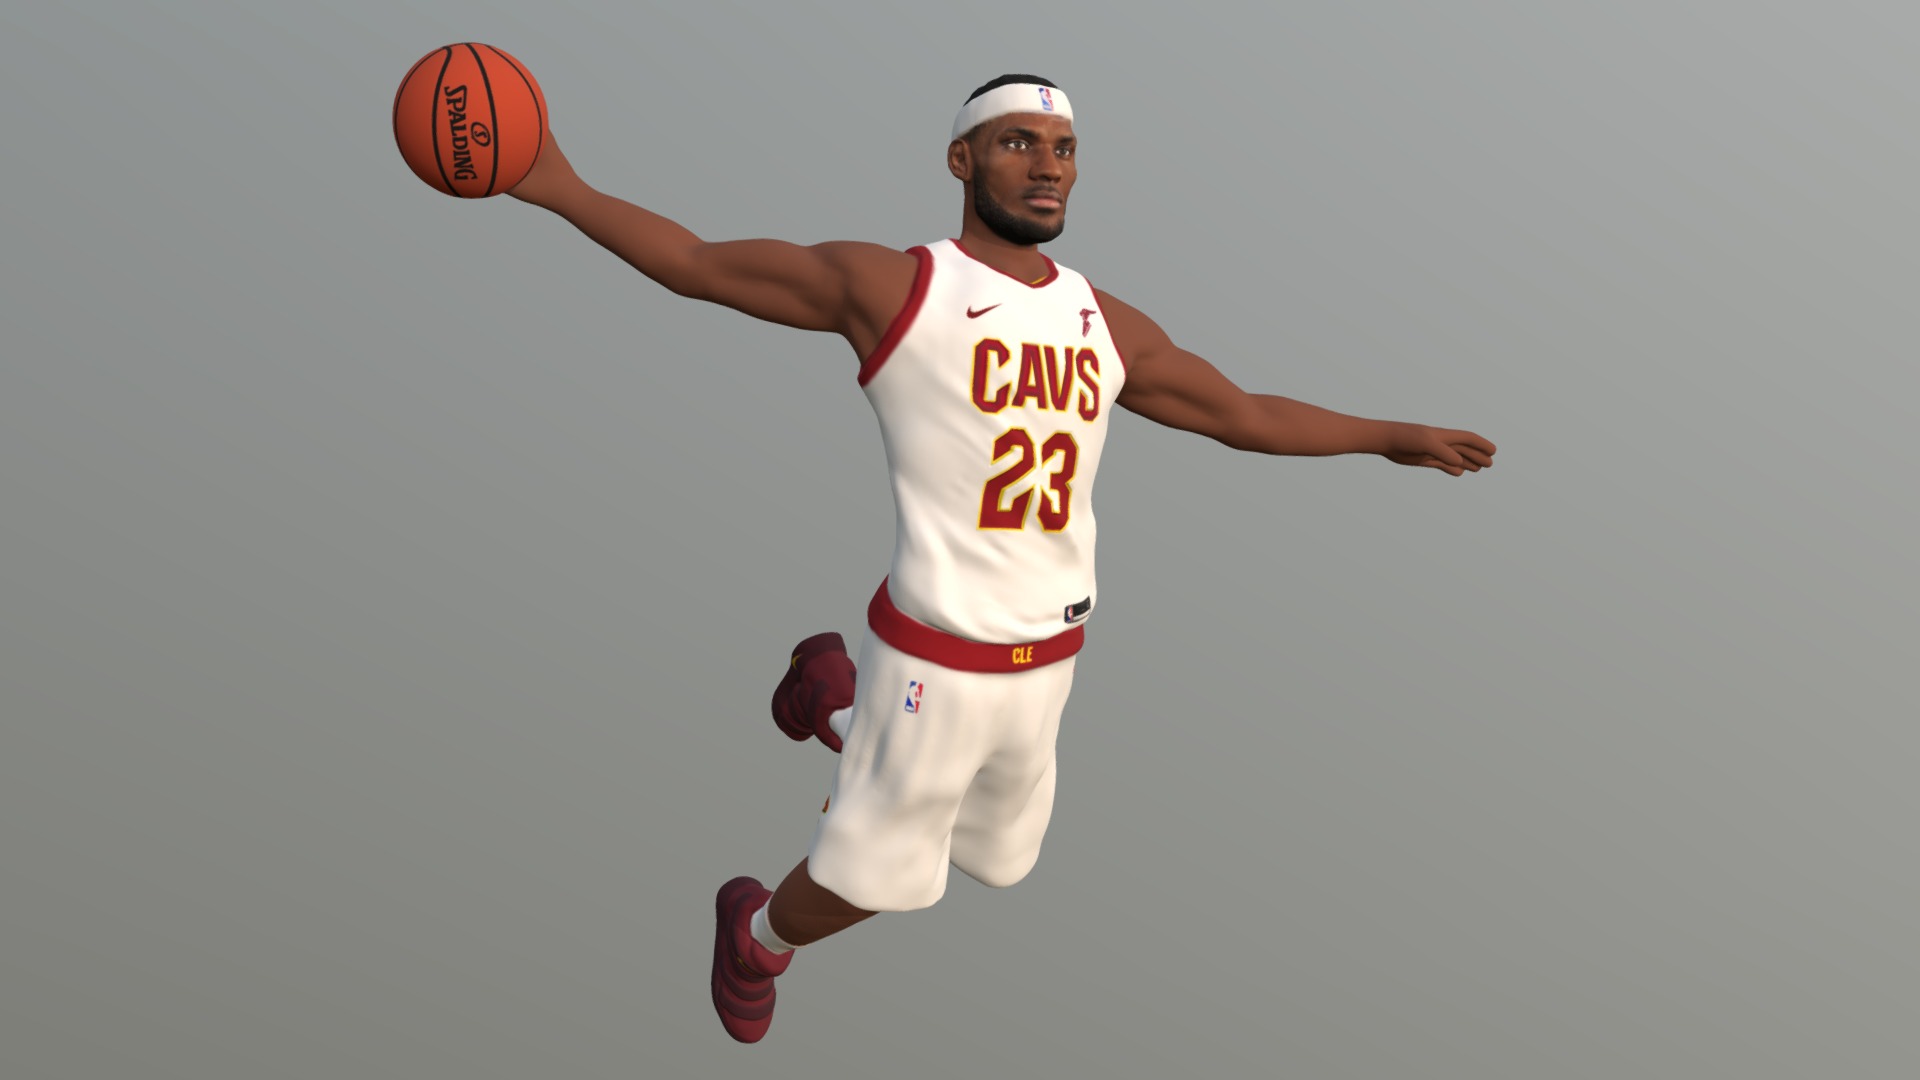 3D model Lebron James for full color 3D printing - This is a 3D model of the Lebron James for full color 3D printing. The 3D model is about a man in a basketball uniform jumping to catch a ball.